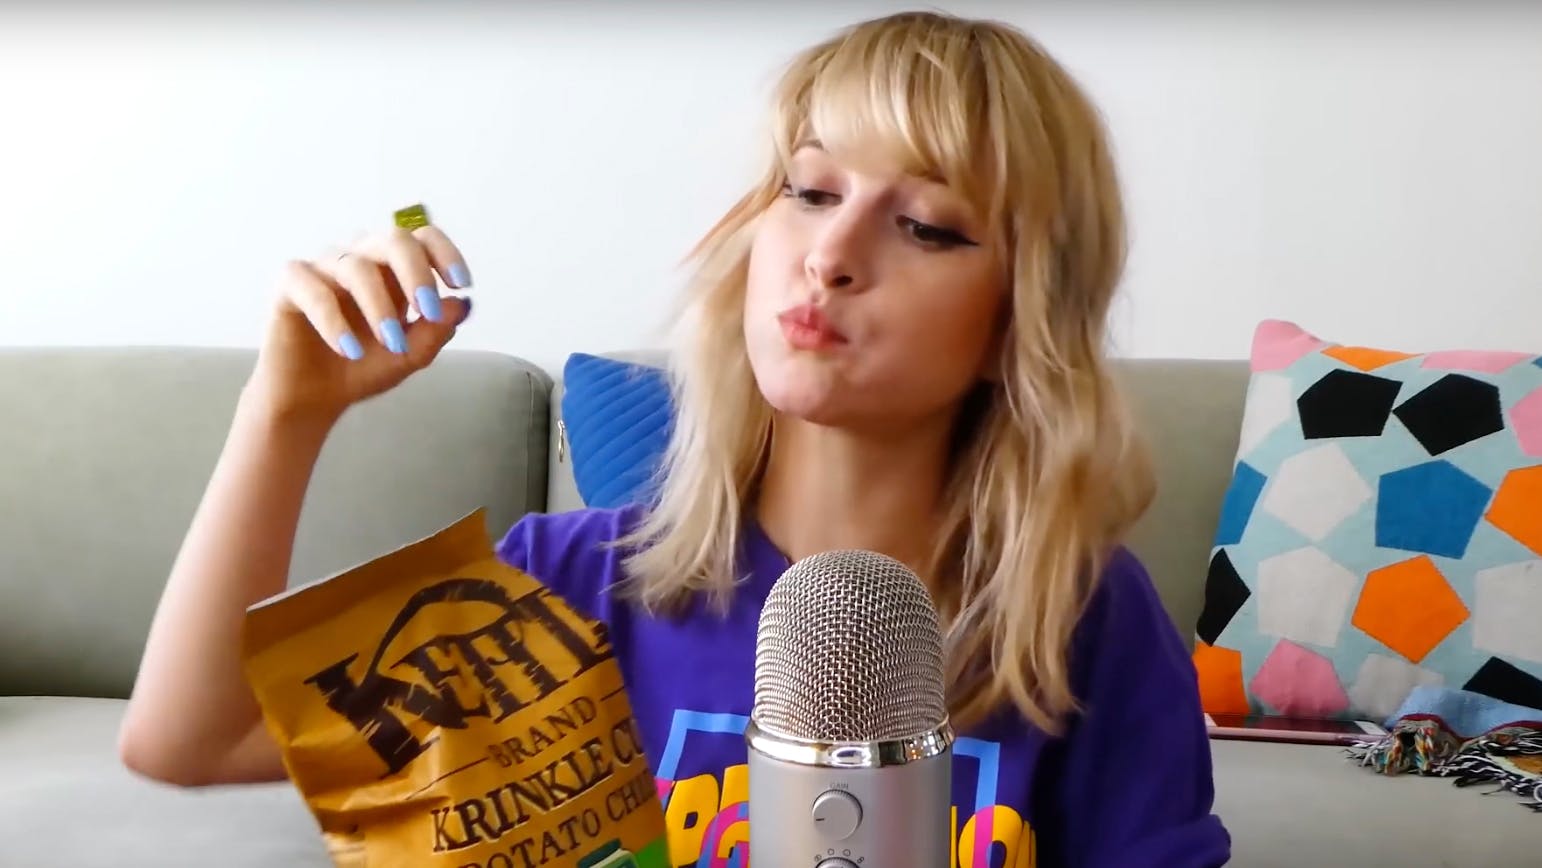 Watch Paramore's Hayley Williams Eat Crisps And Whisper In Bizarre New Video